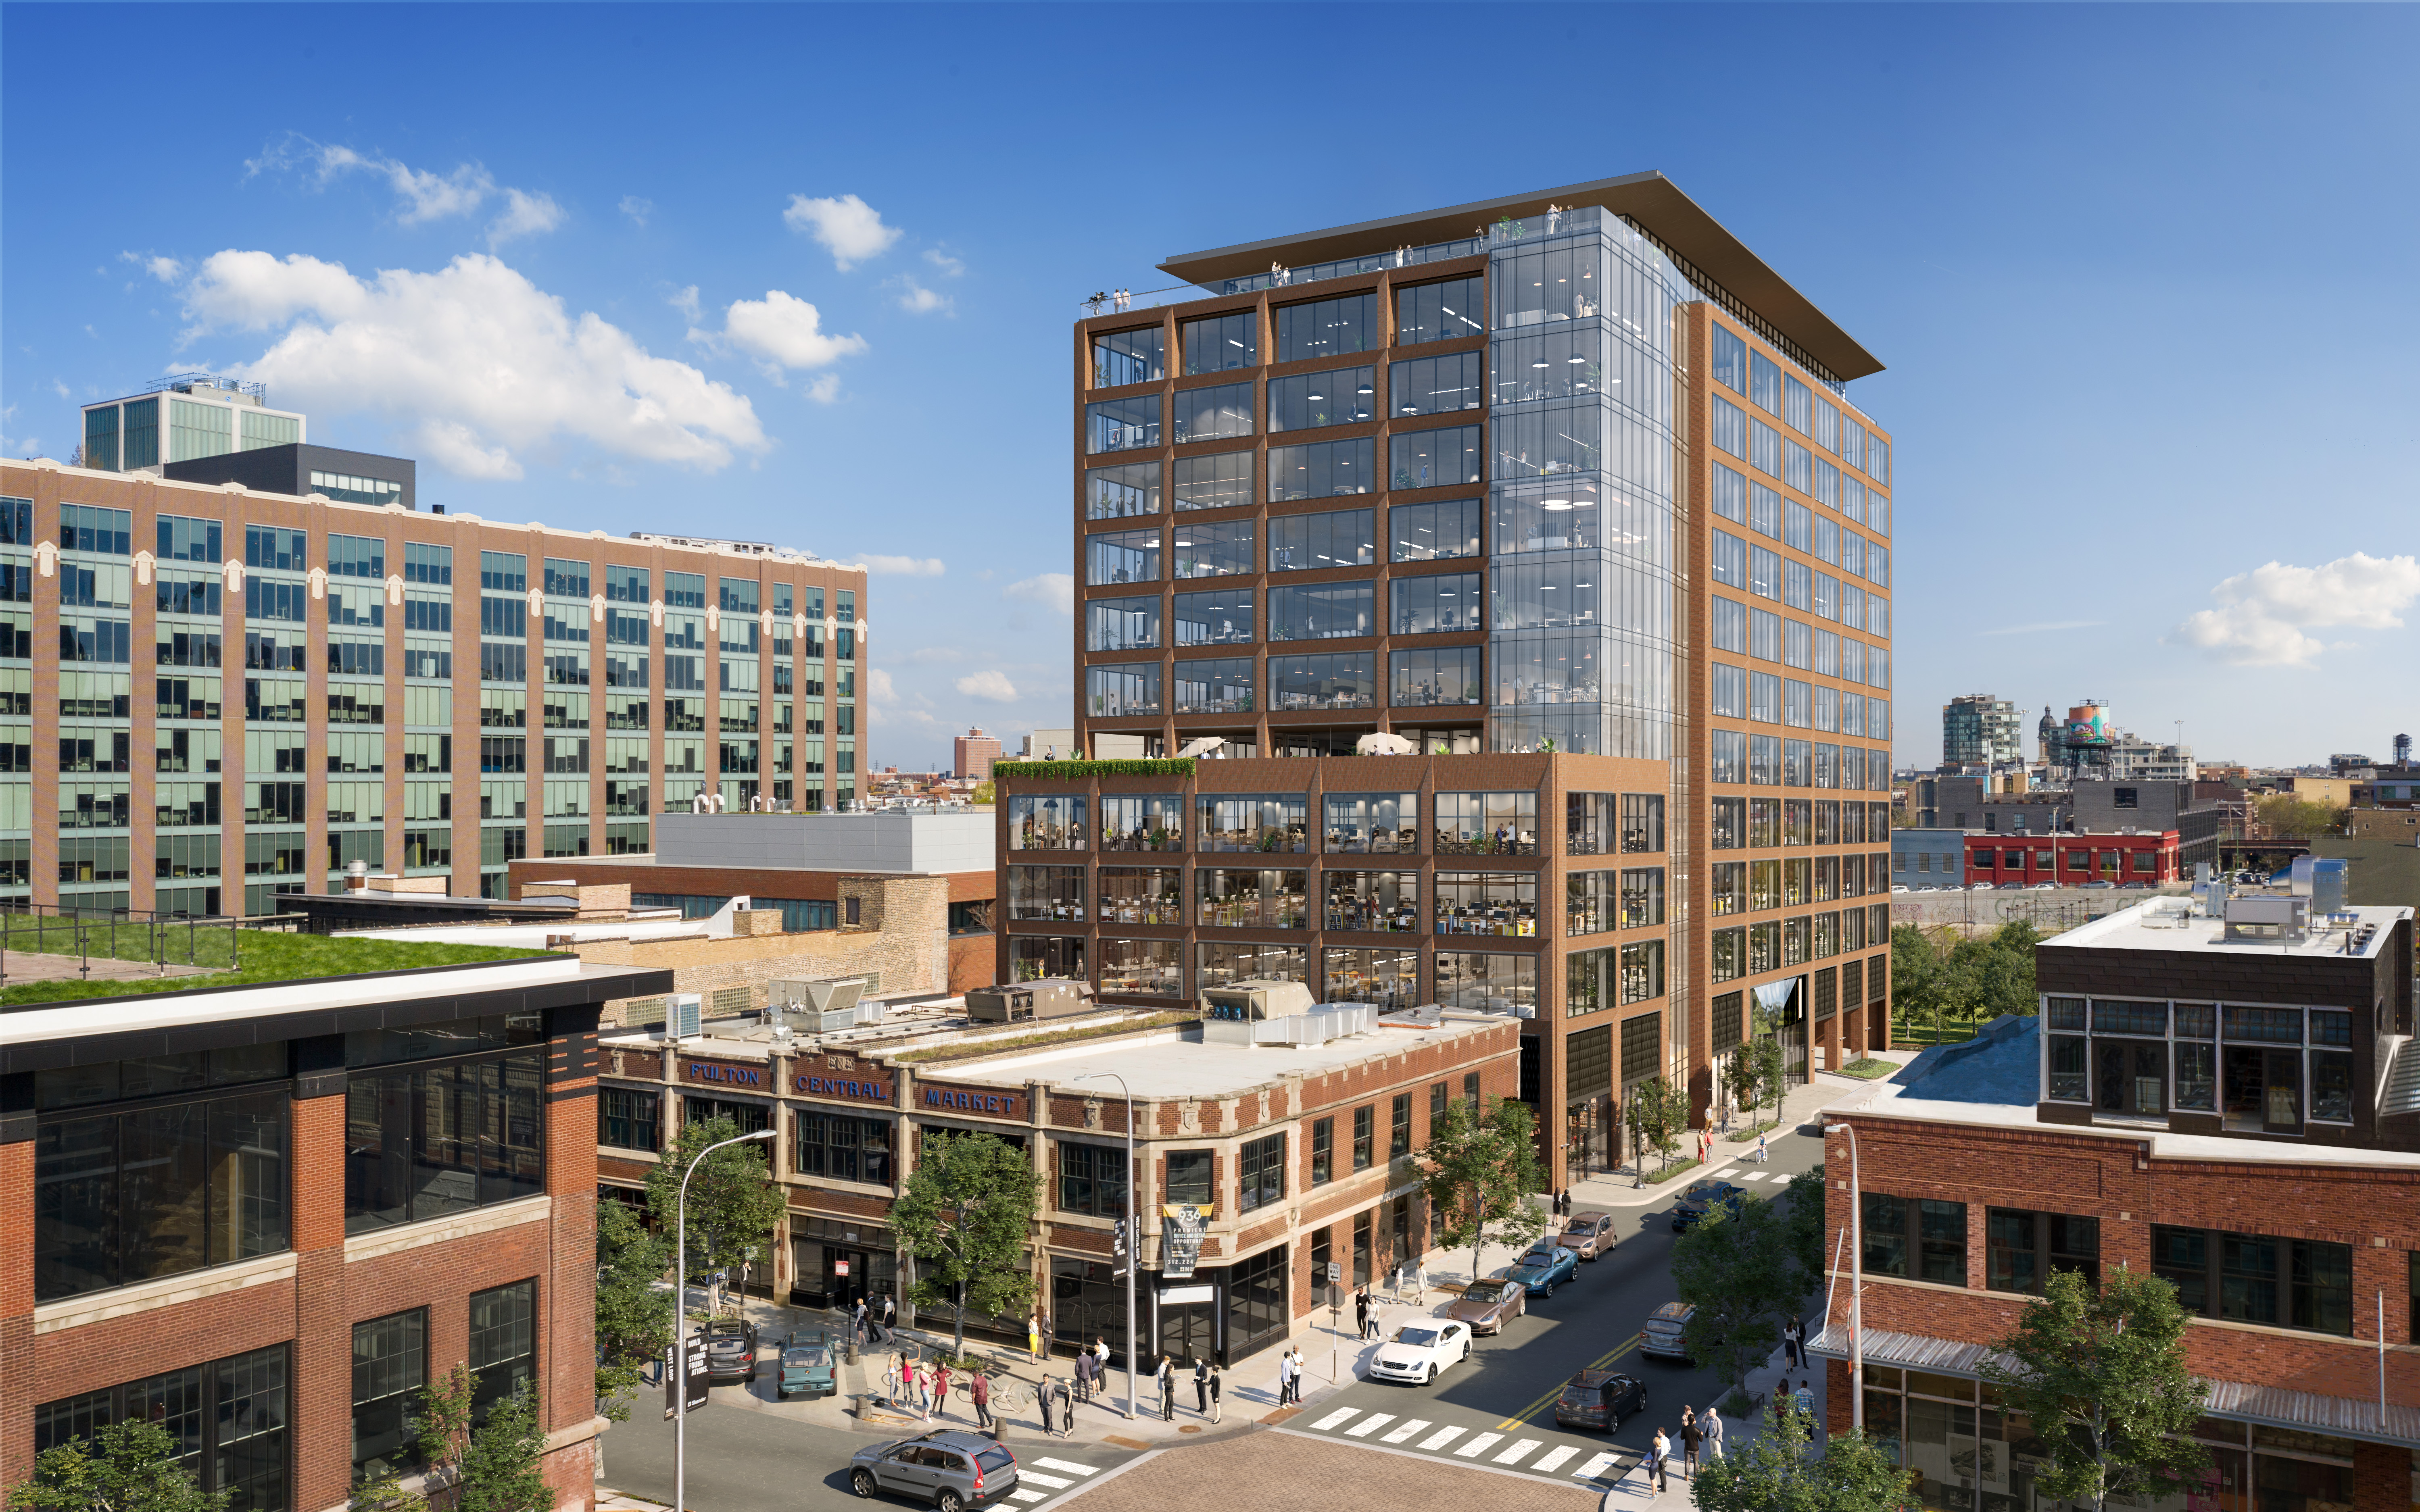 A 13-story office building with a brick and glass facade and a rooftop terrace.